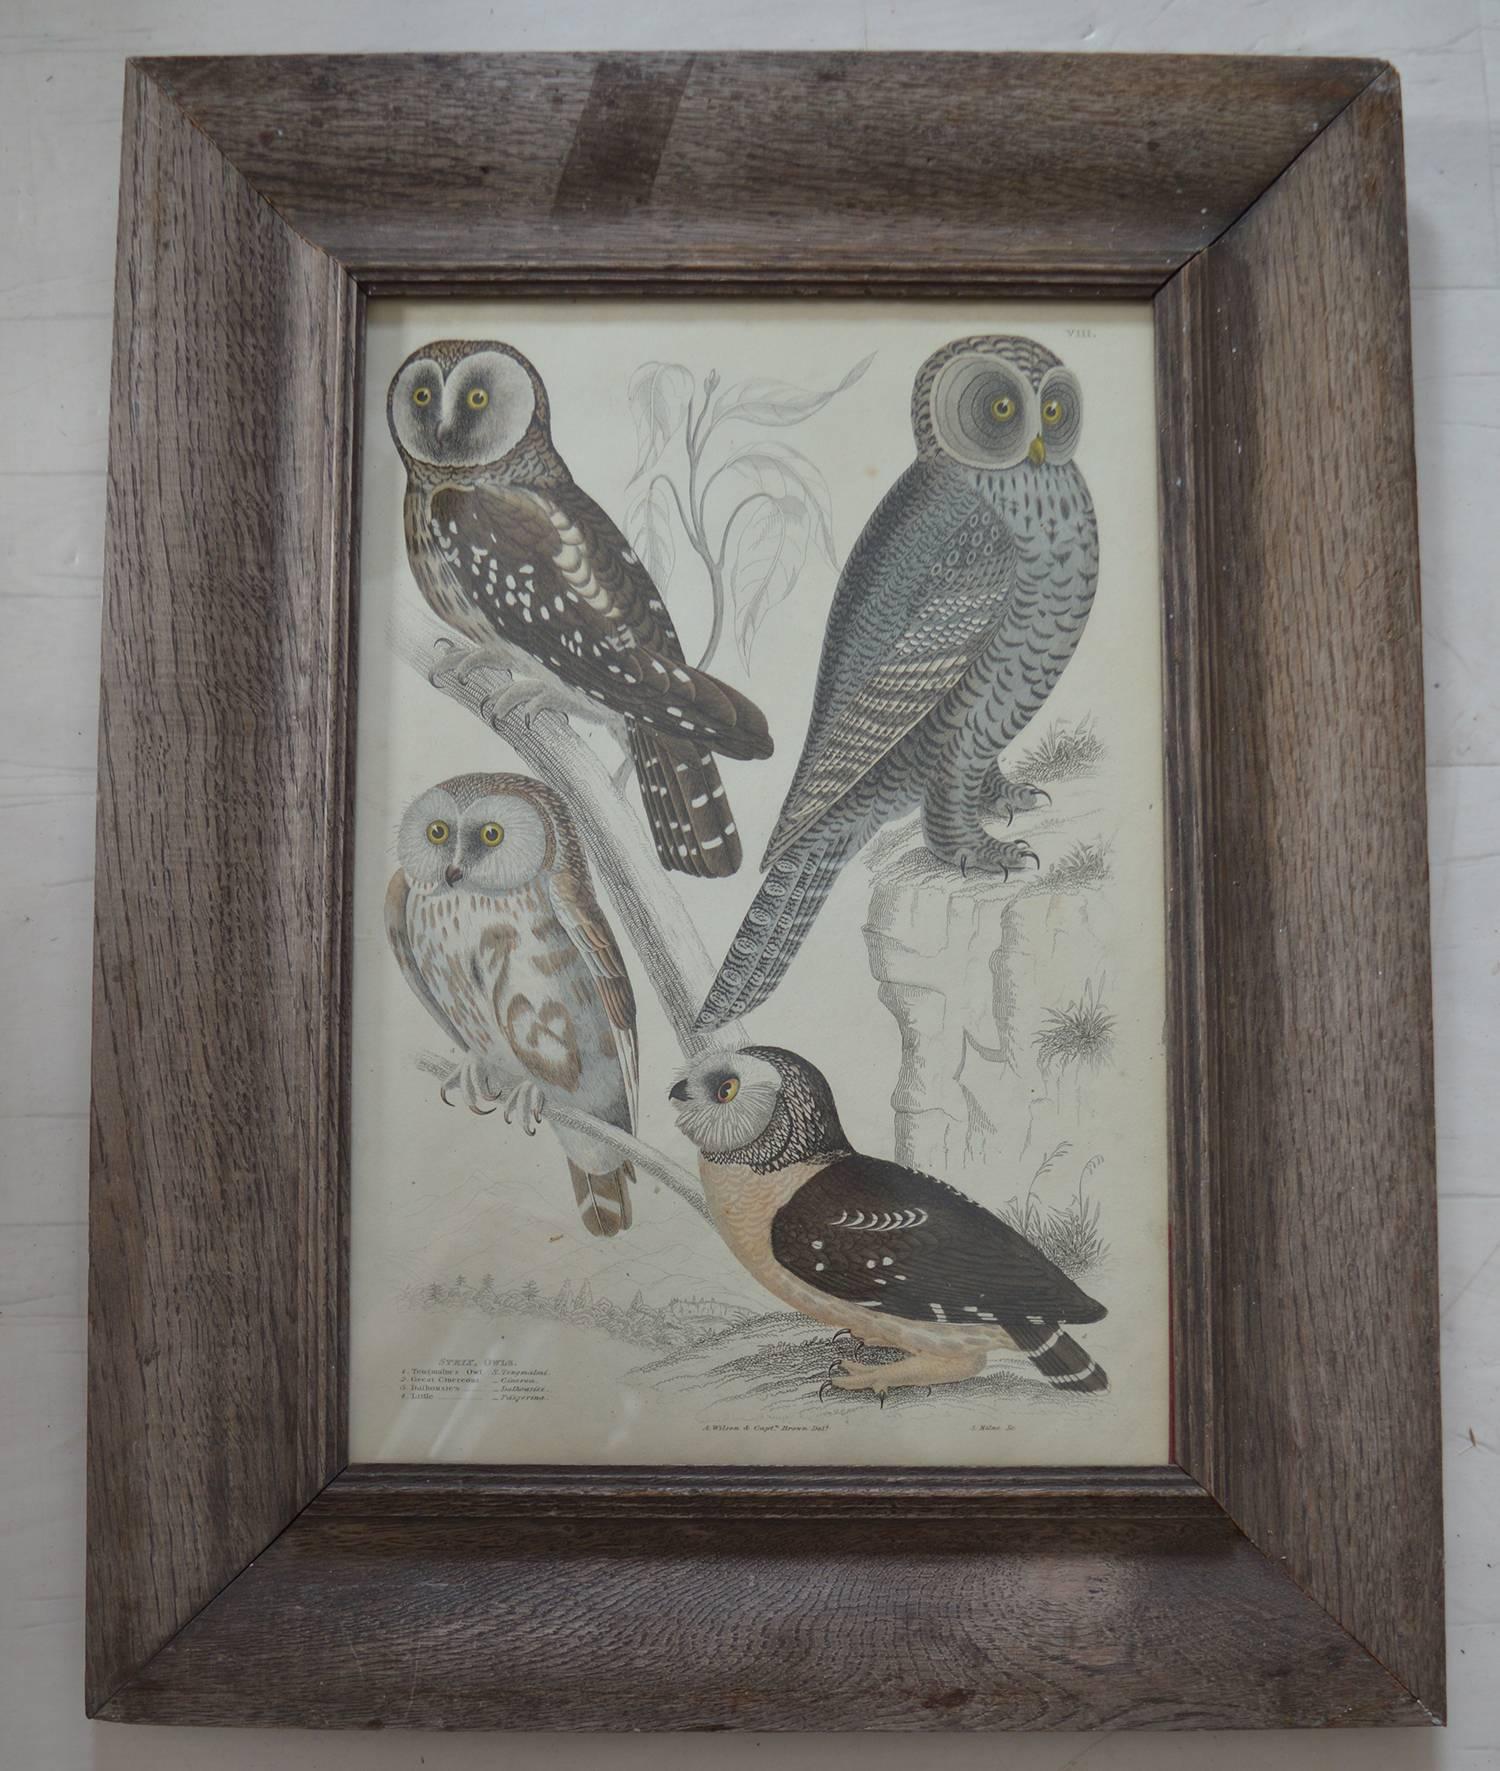 Great image of owls.

Hand colored lithograph by Milne.

After an or original drawing by Captain brown.

Original color.

Published by Smith, Elder 1835.

Presented in a distressed oak frame.

The measurement given below is the frame